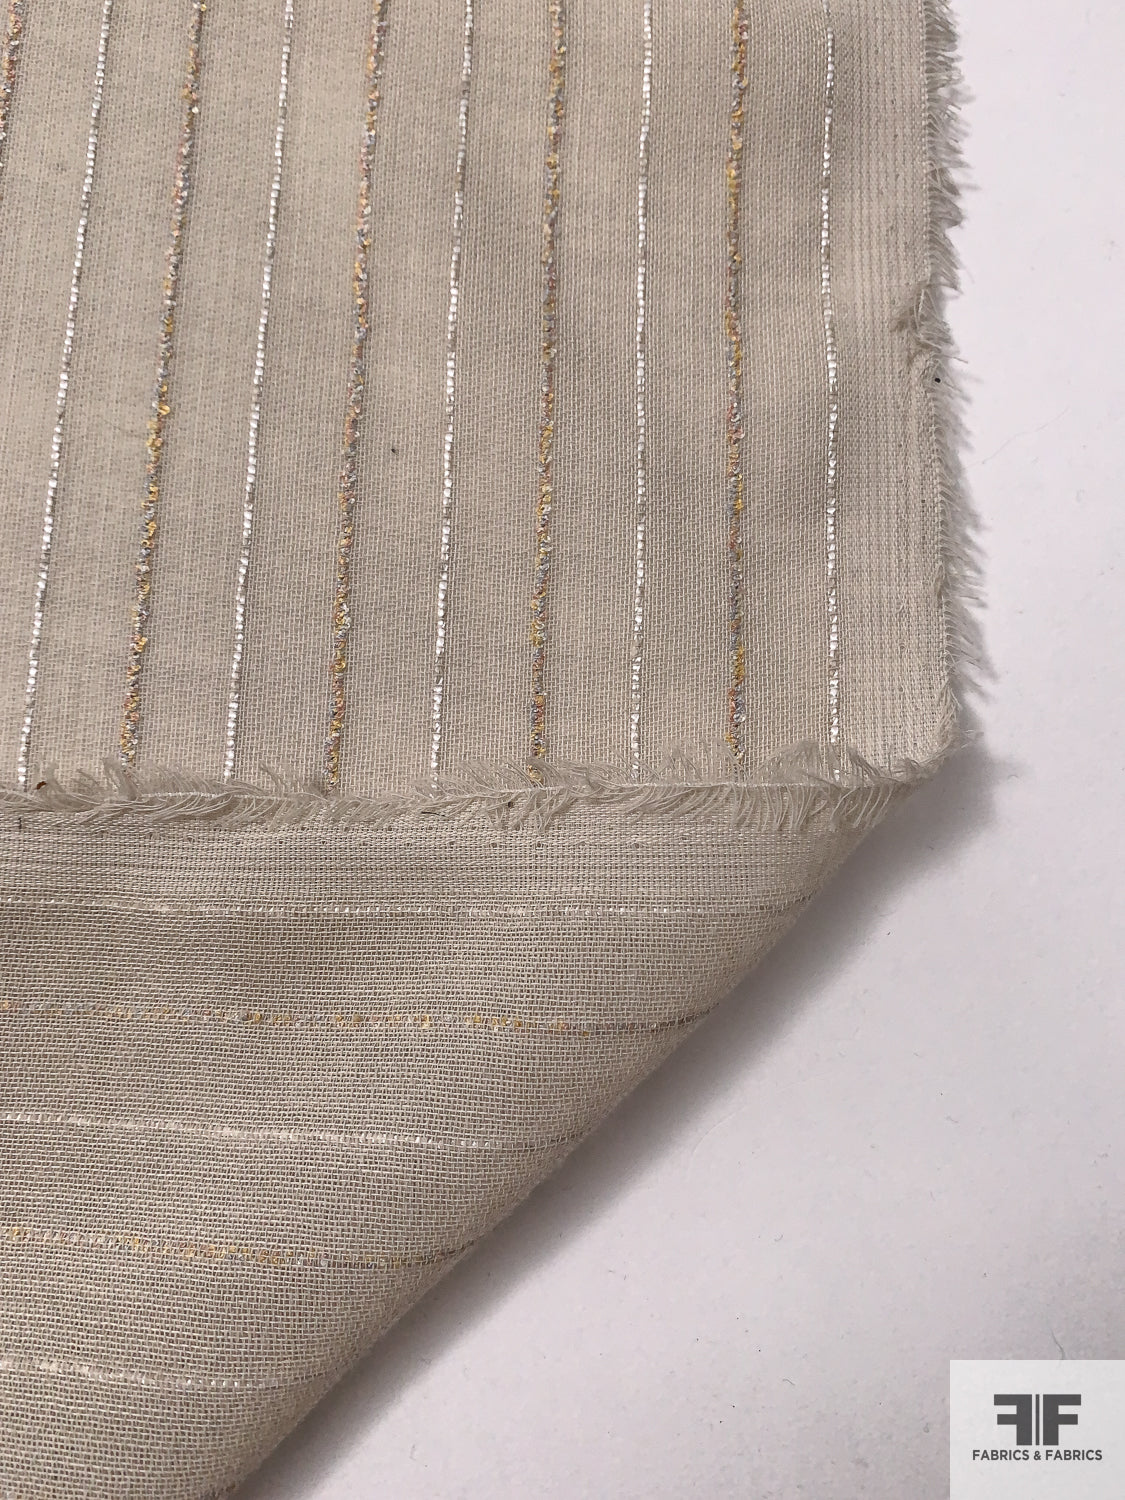 Italian Plain-Weave Virgin Wool Blend Suiting with Textured Striped Design - Beige / Marigold / Off-White